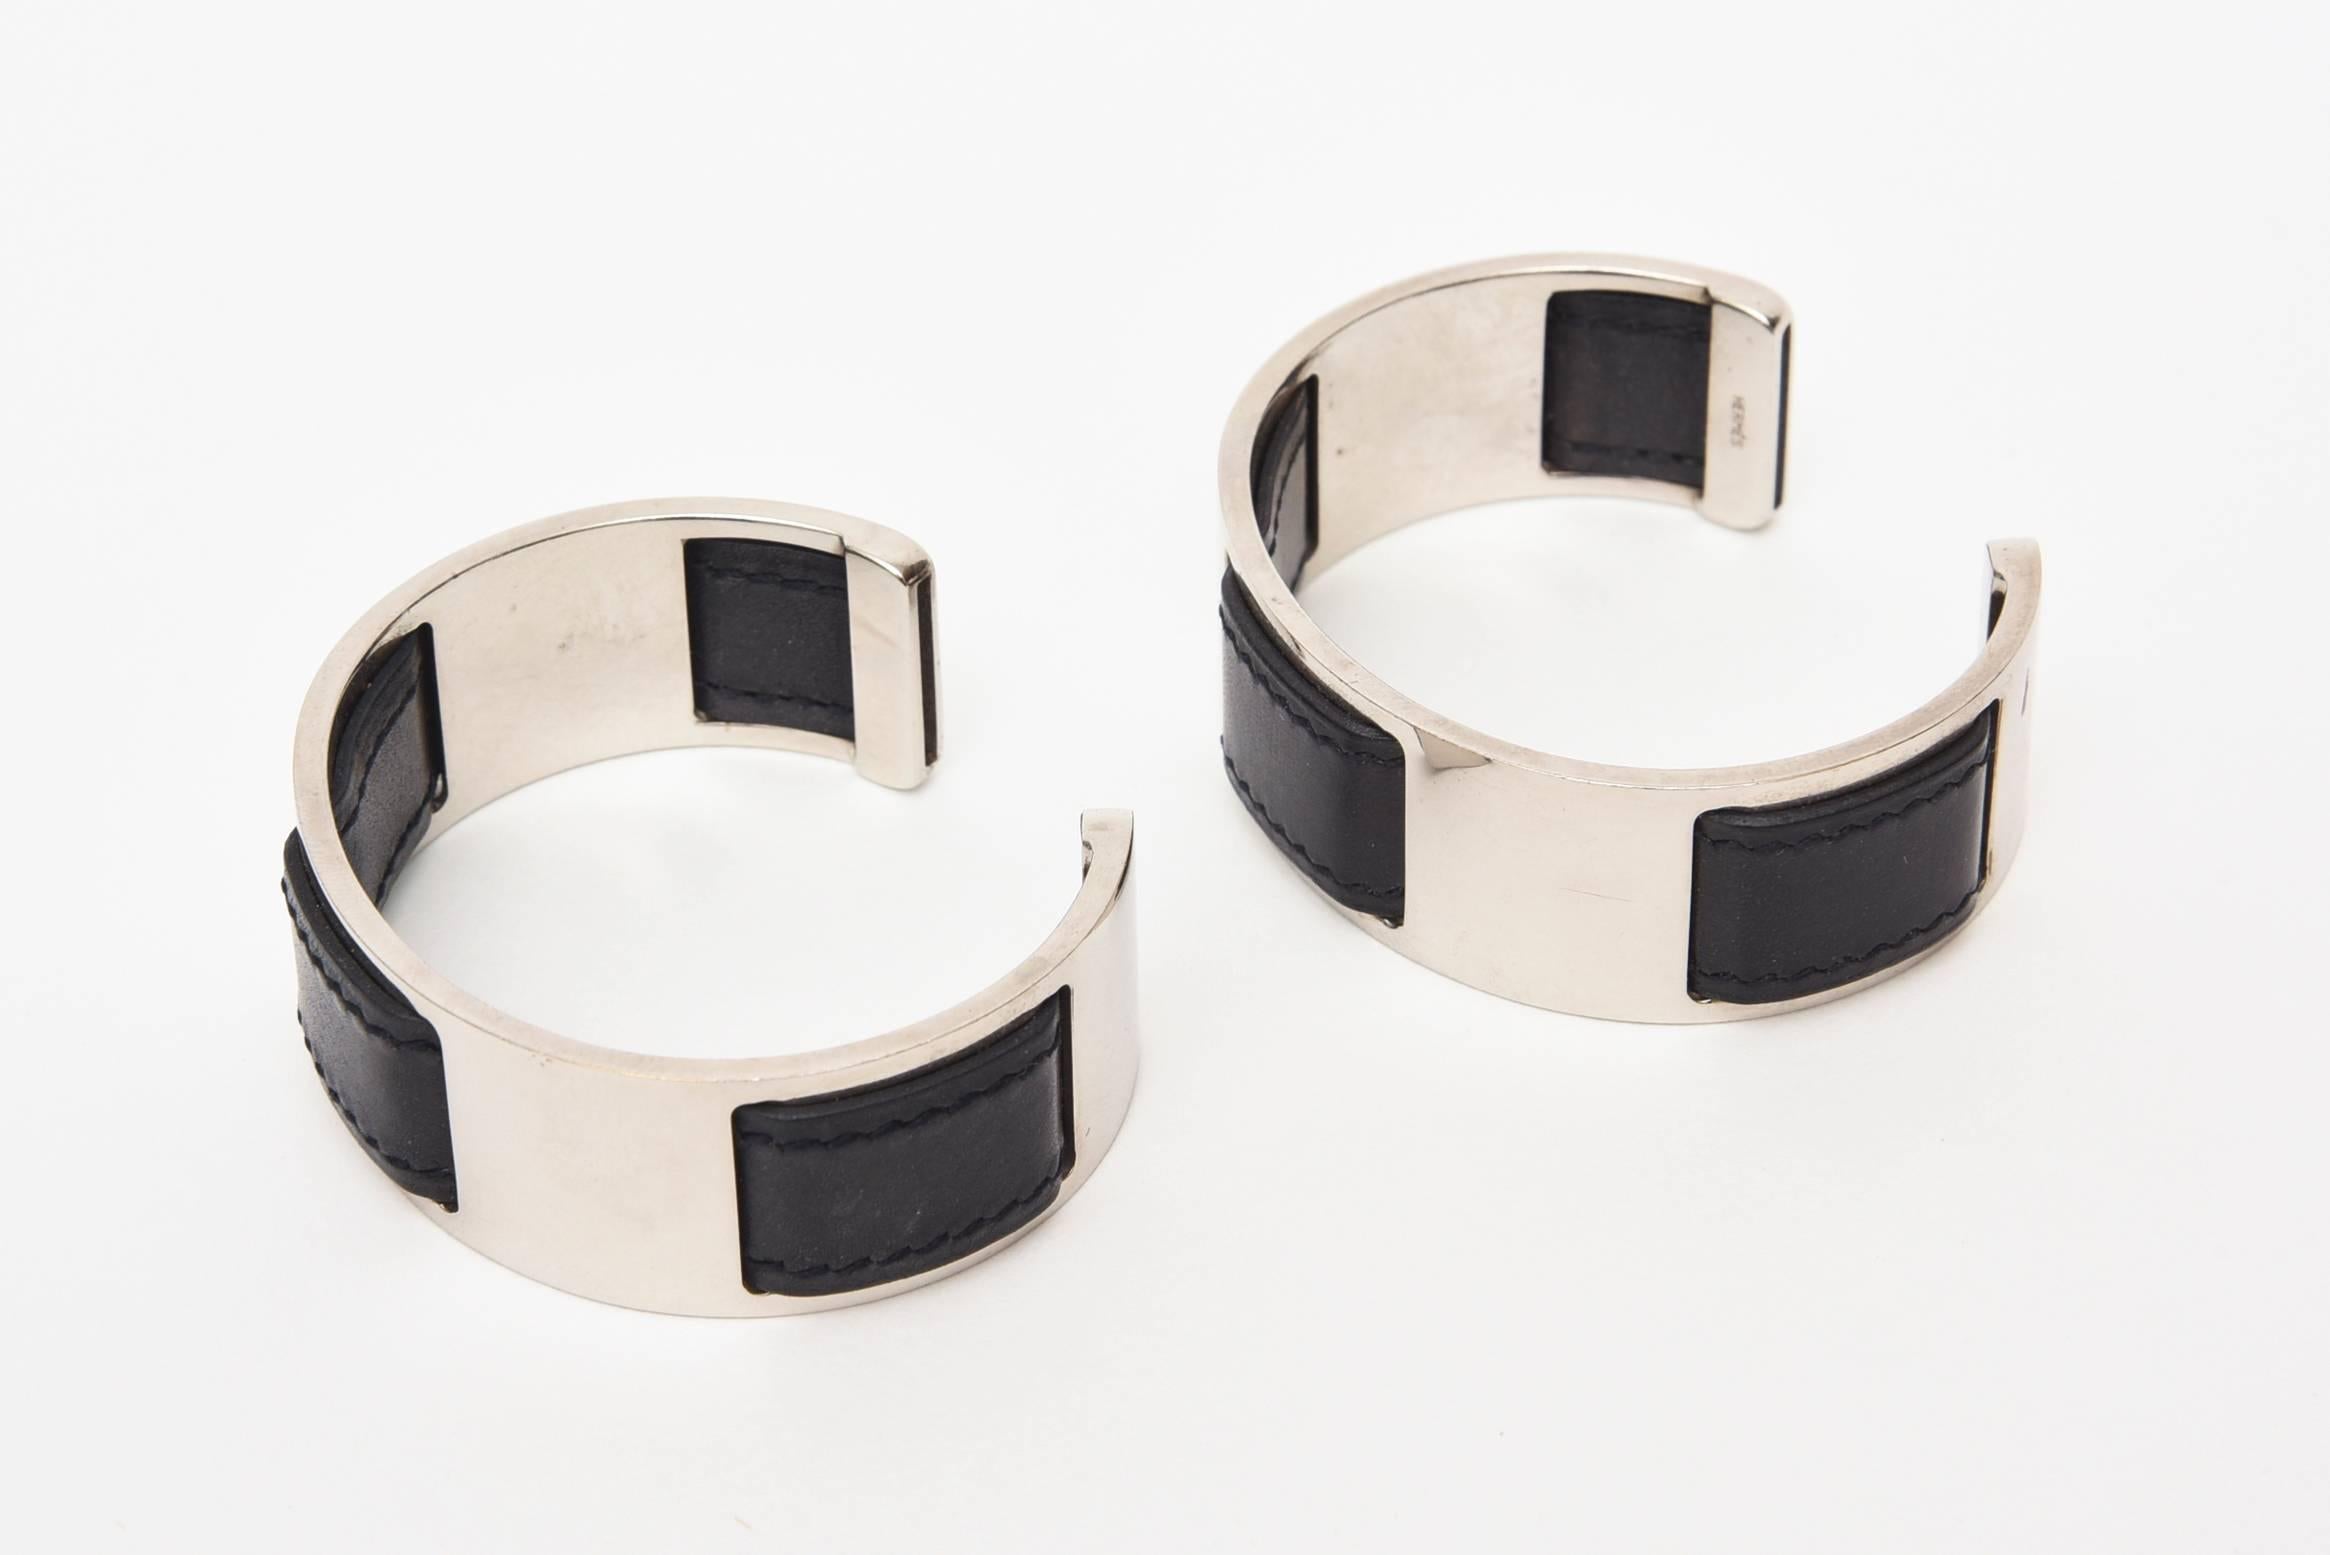 These classic but unusual early bracelets designed by Martin Margiela for Hermes are black leather and chrome. They must be worn as a pair to give the great effect. One can be worn on each wrist or certainly together. Black leather is interspersed